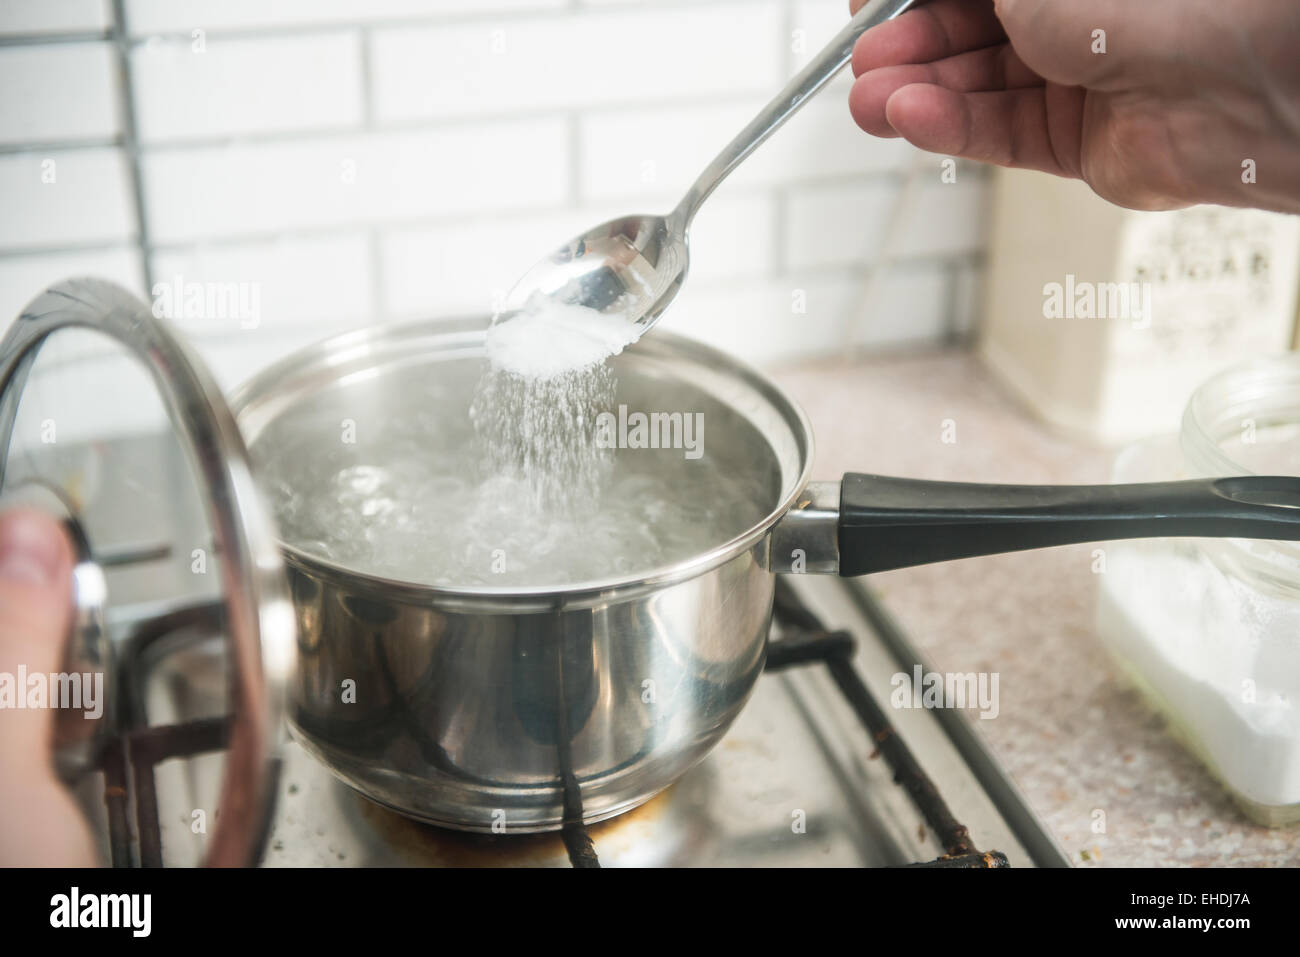 https://c8.alamy.com/comp/EHDJ7A/salted-boiling-water-cook-cooking-dinner-EHDJ7A.jpg